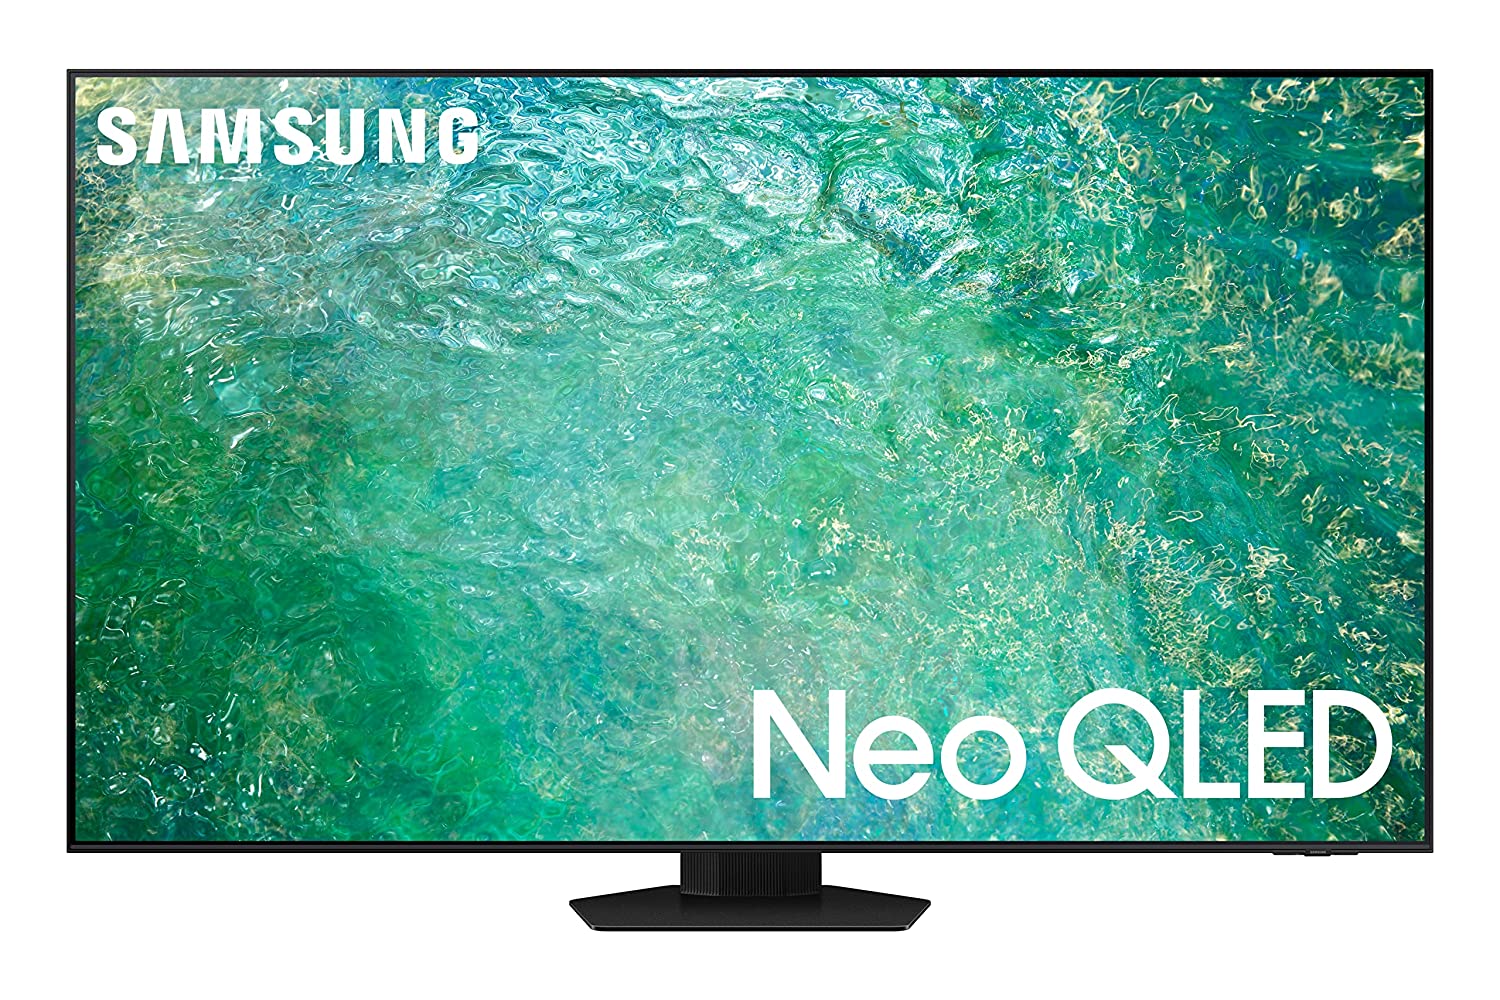 SAMSUNG Neo QLED 138 cm (55 inch) QLED Ultra HD (4K) Smart Tizen TV Online  at best Prices In India